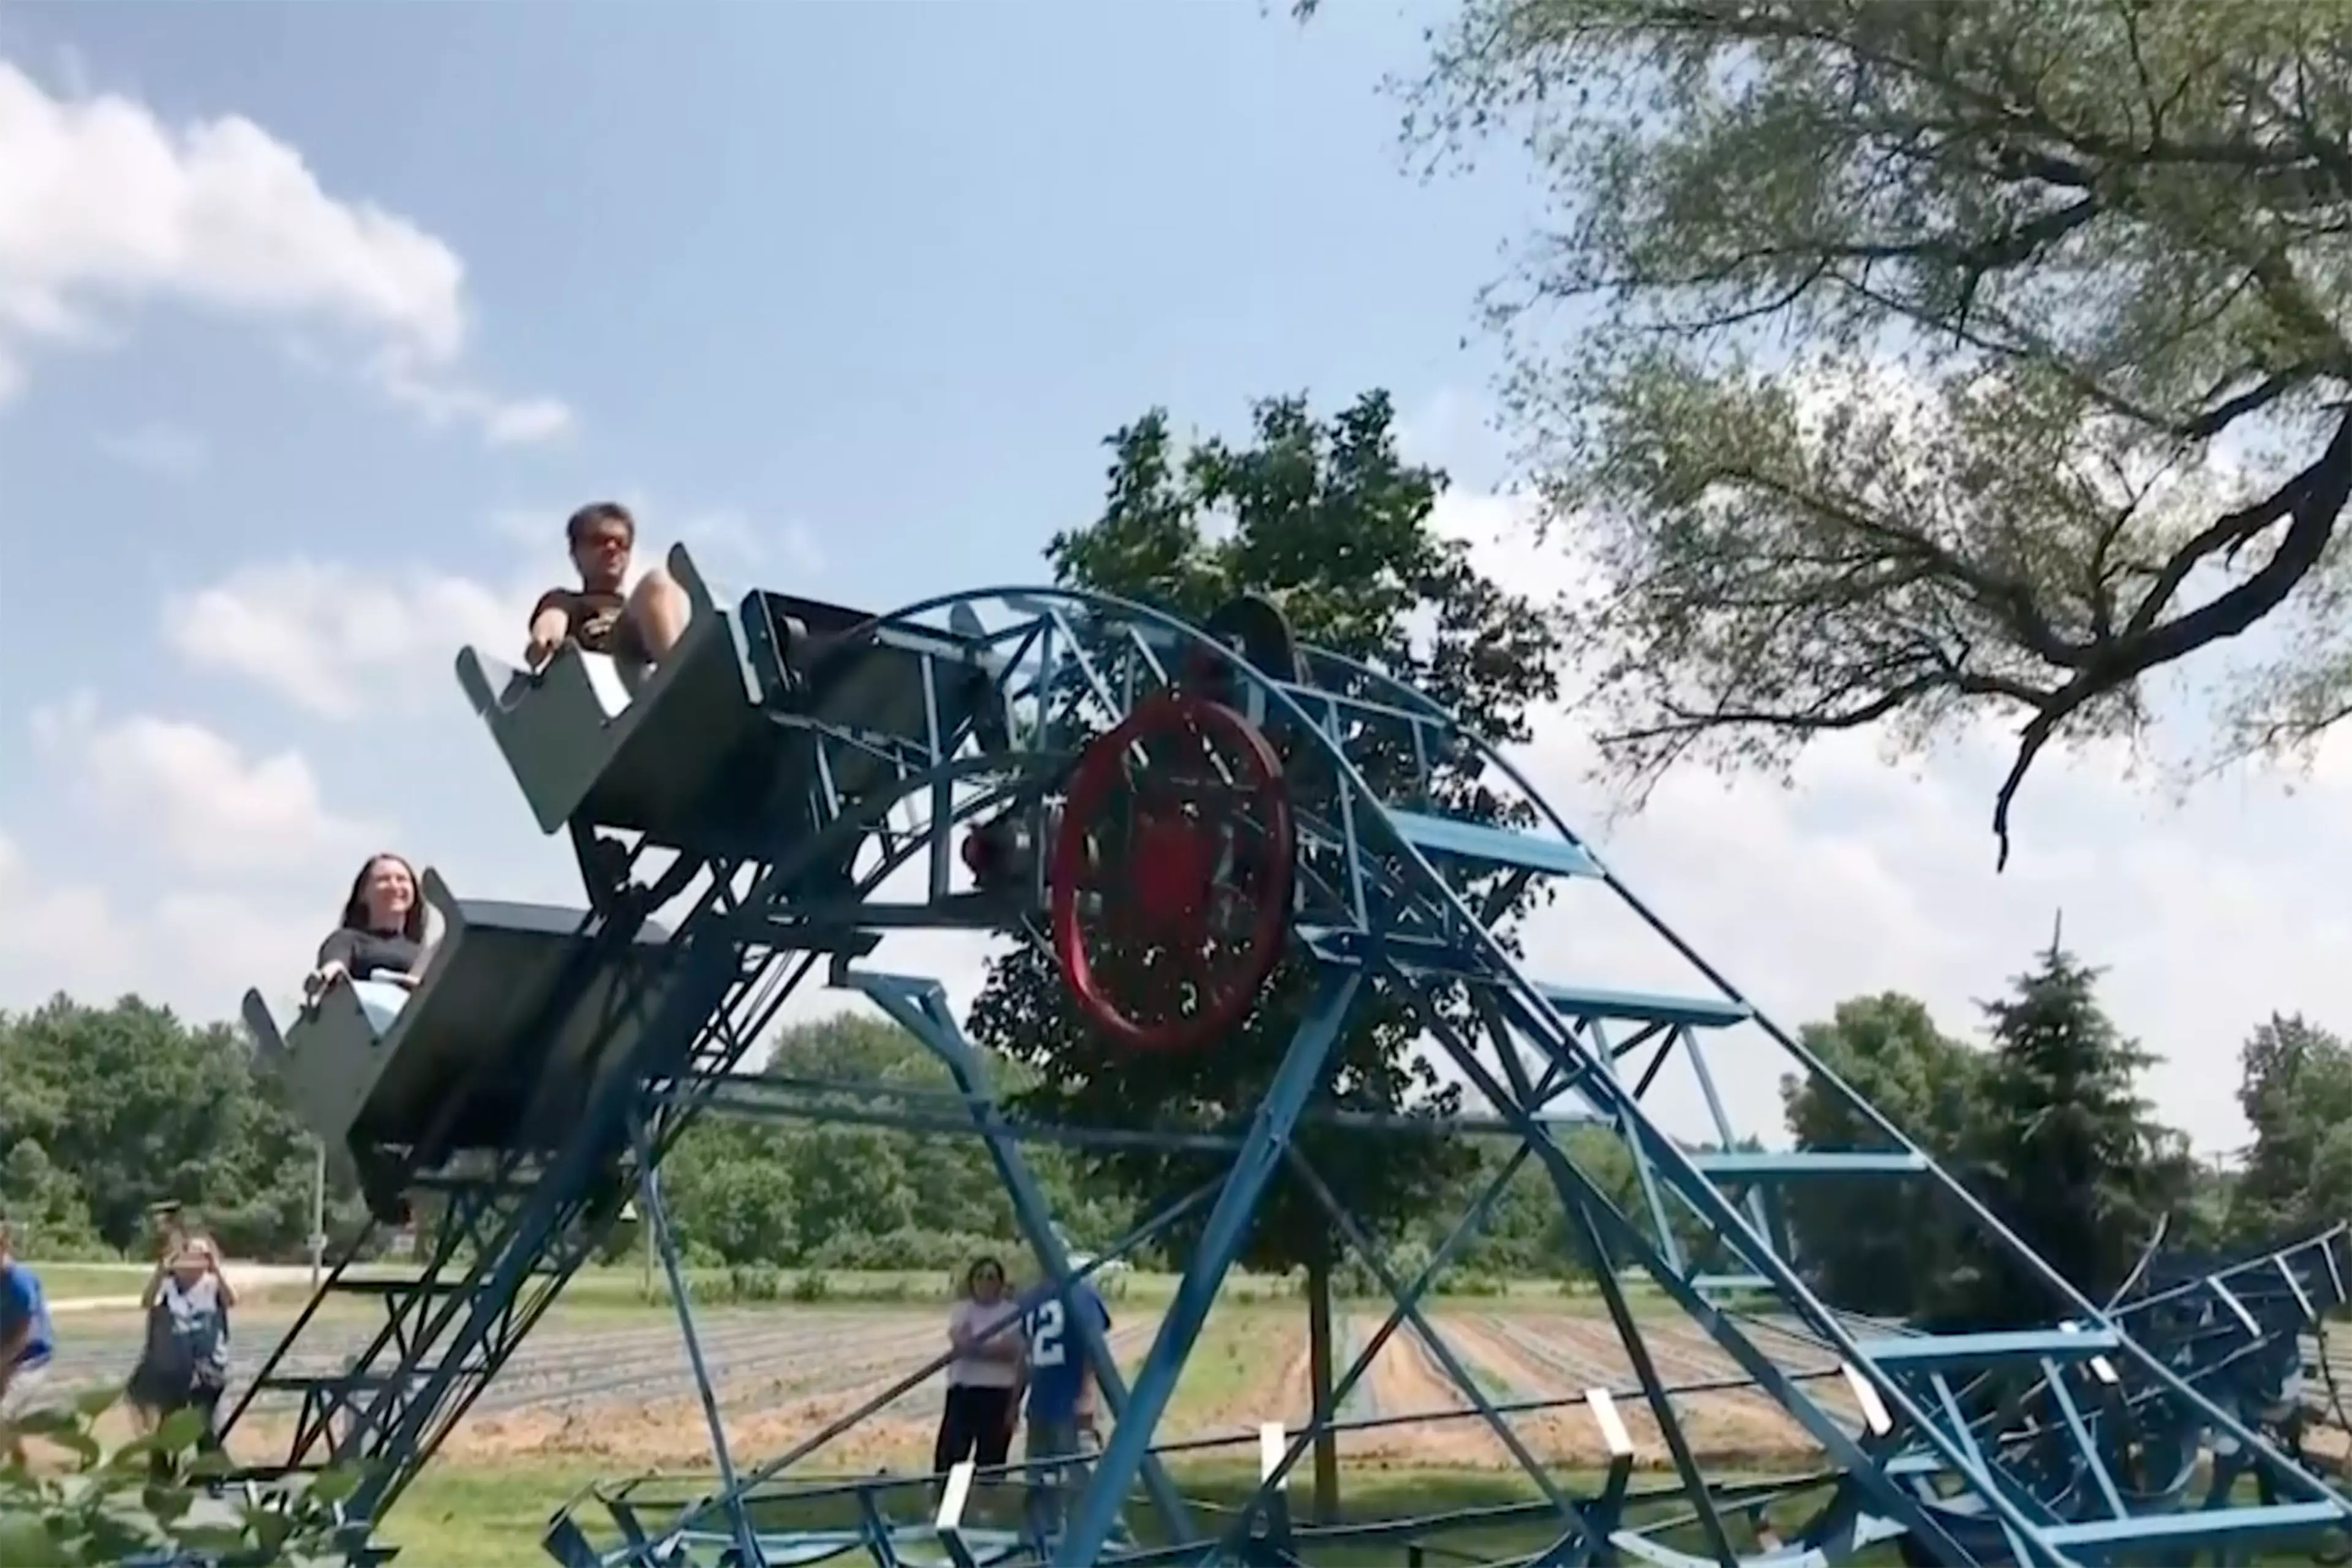 The Ohio Valley Coasters Team visited John Ivers backyard roller coaster.